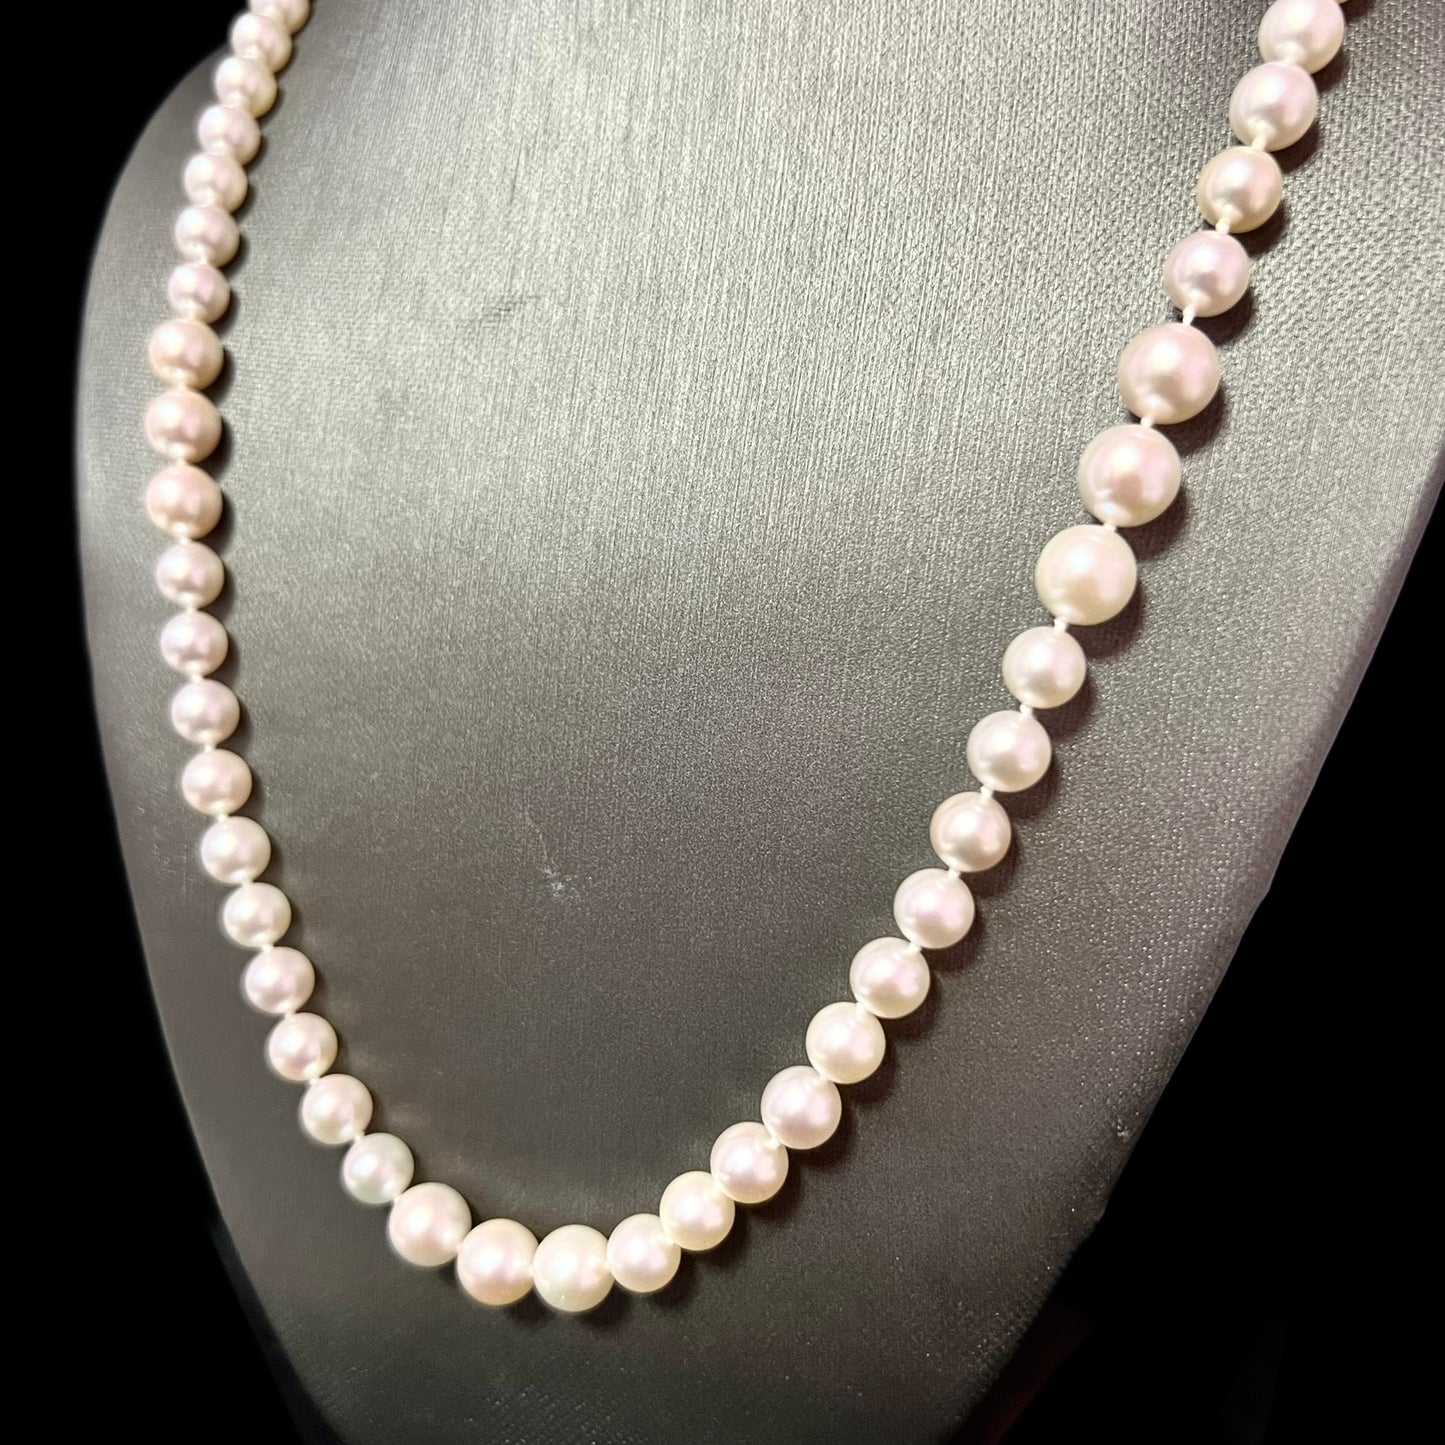 Akoya Pearl Necklace 27" 14k White Gold 8.50 mm Certified $6,950 215647 - Certified Estate Jewelry